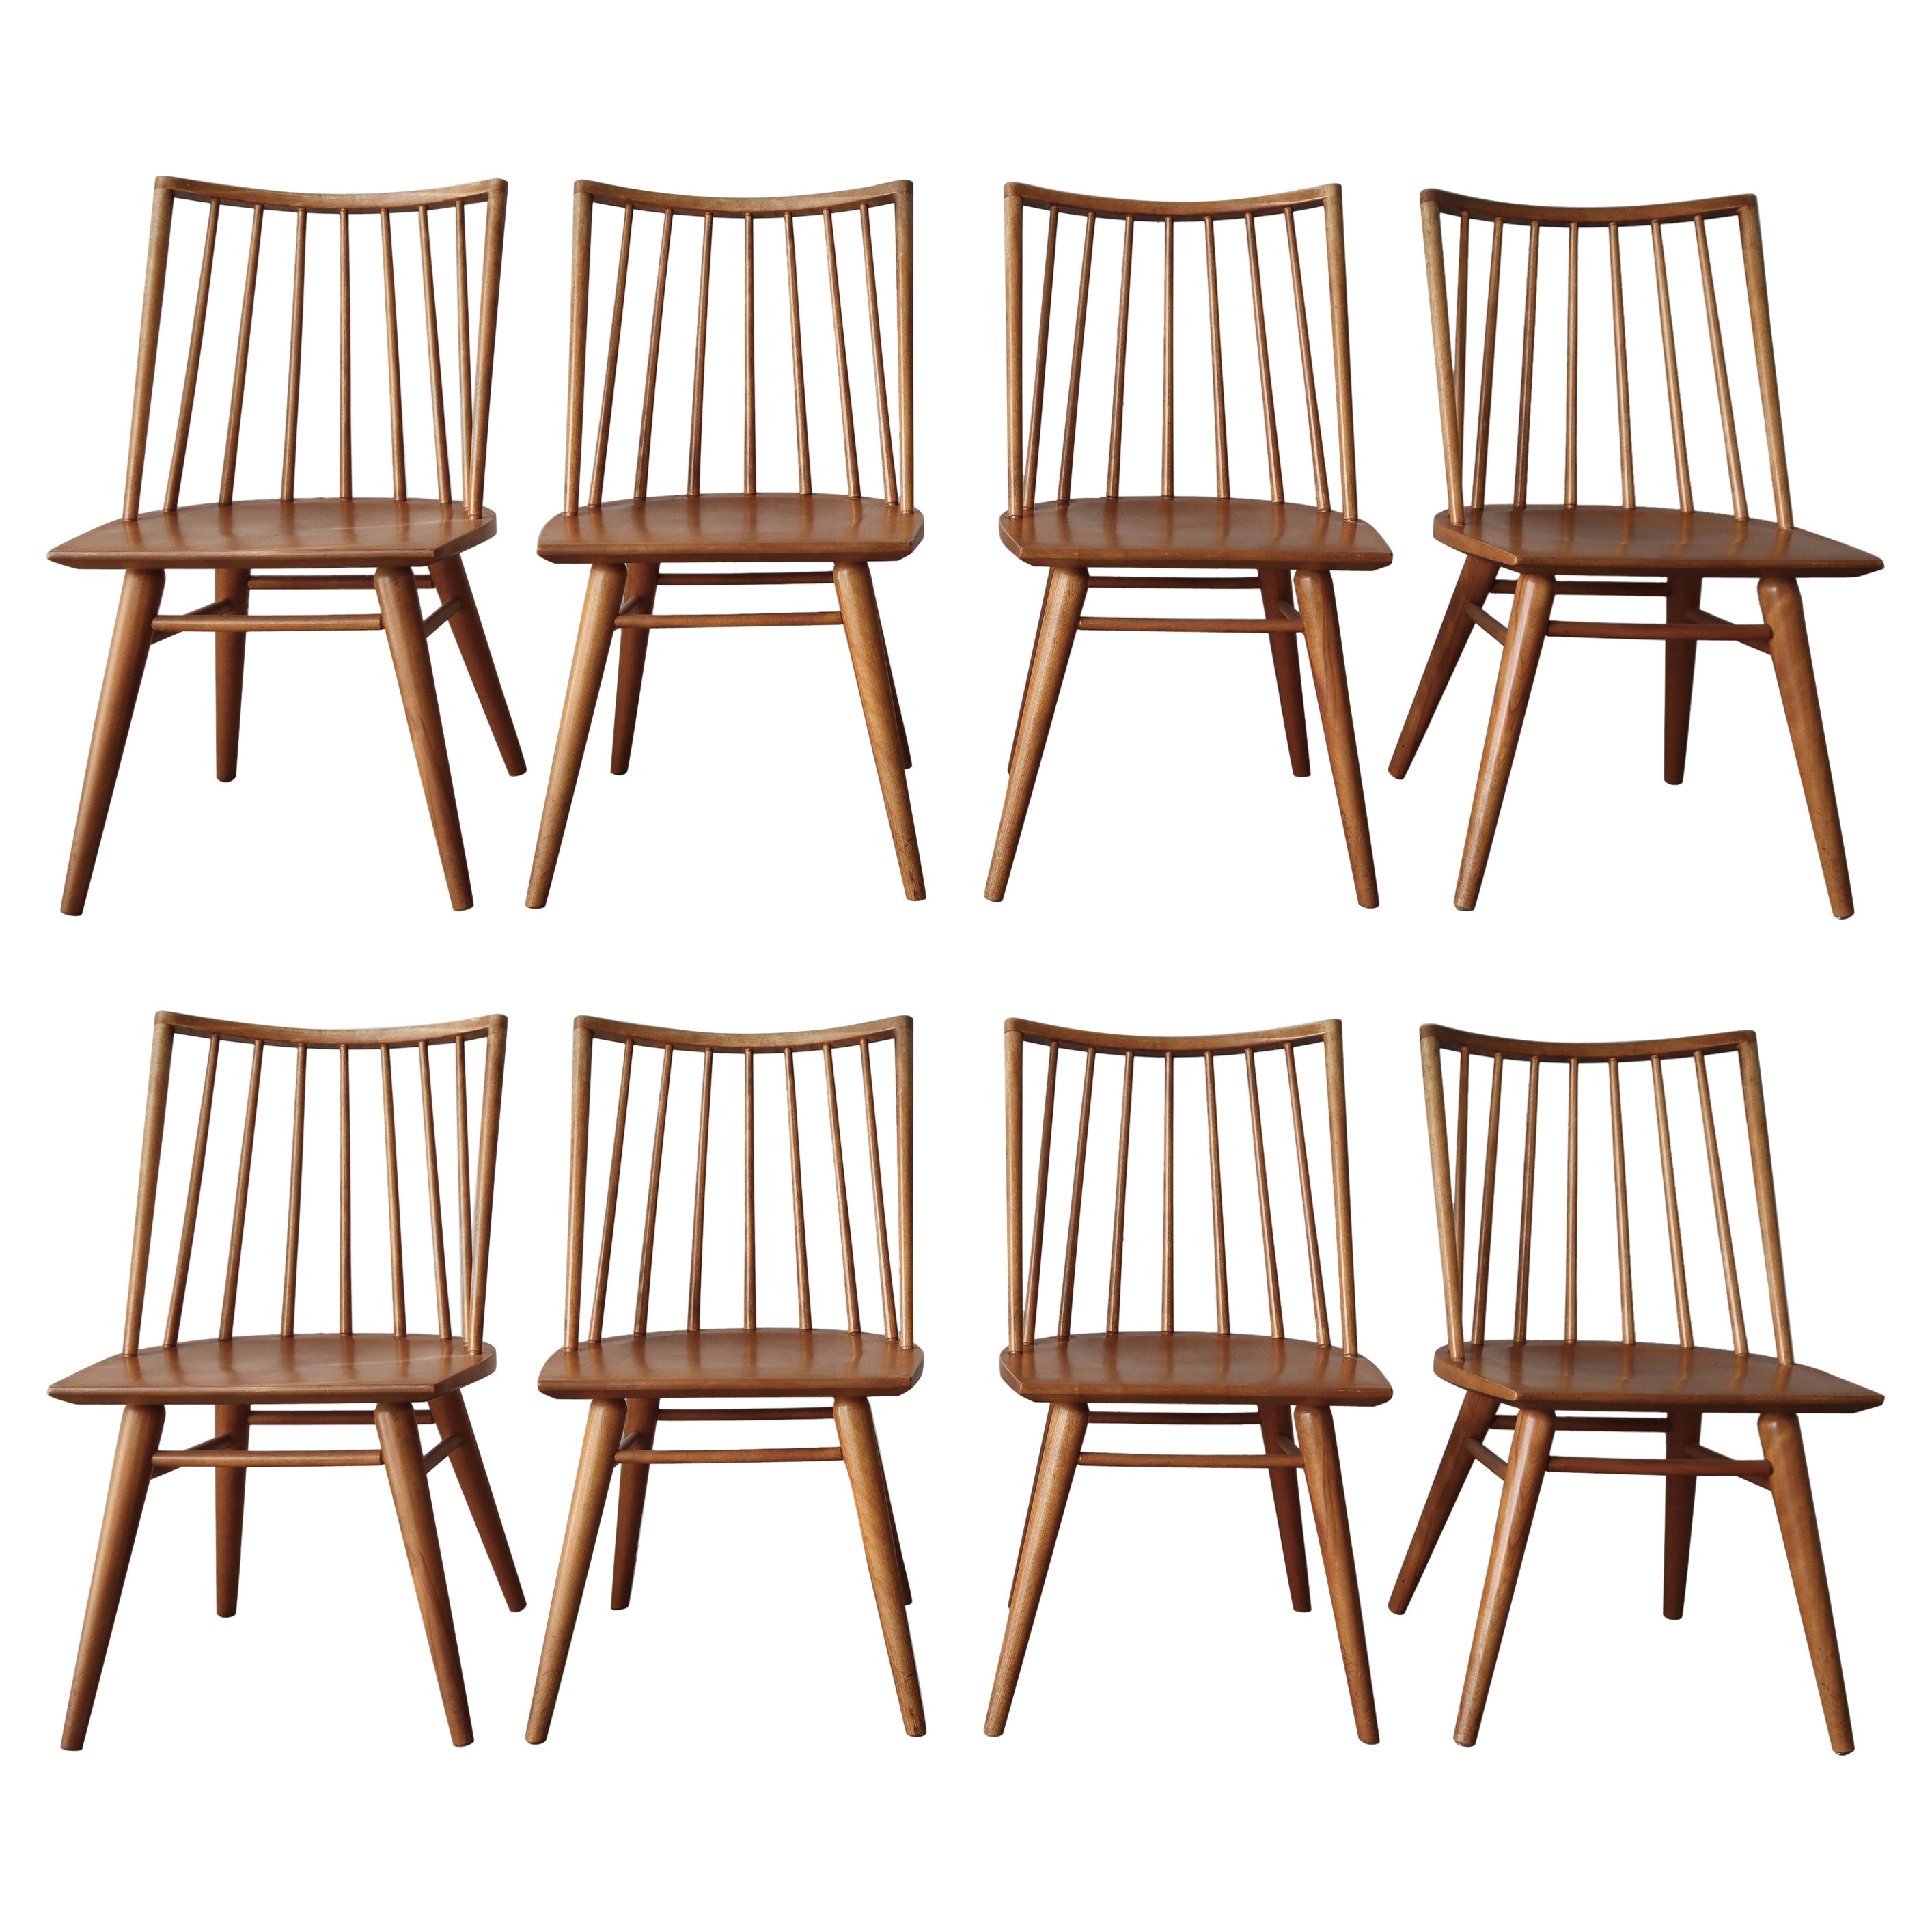 Set of 8 Minimalist Spindle Back Dining Chairs by Conant Ball